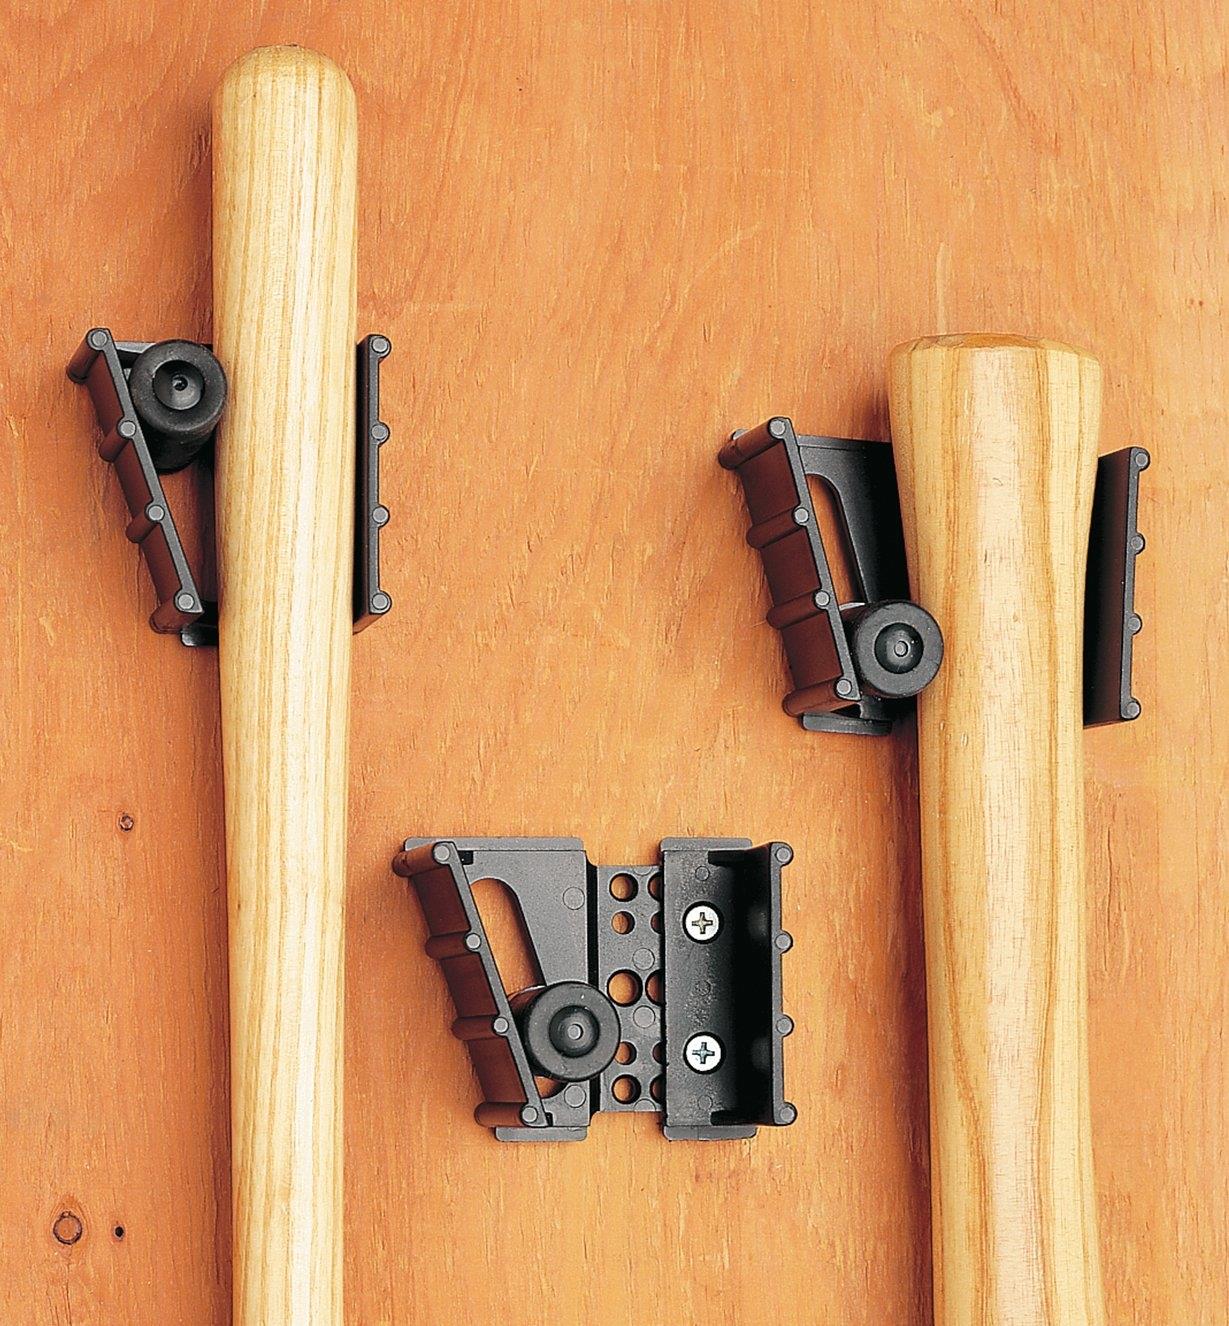 Three Adjustable Gripits attached to a wall, two of them holding tool handles